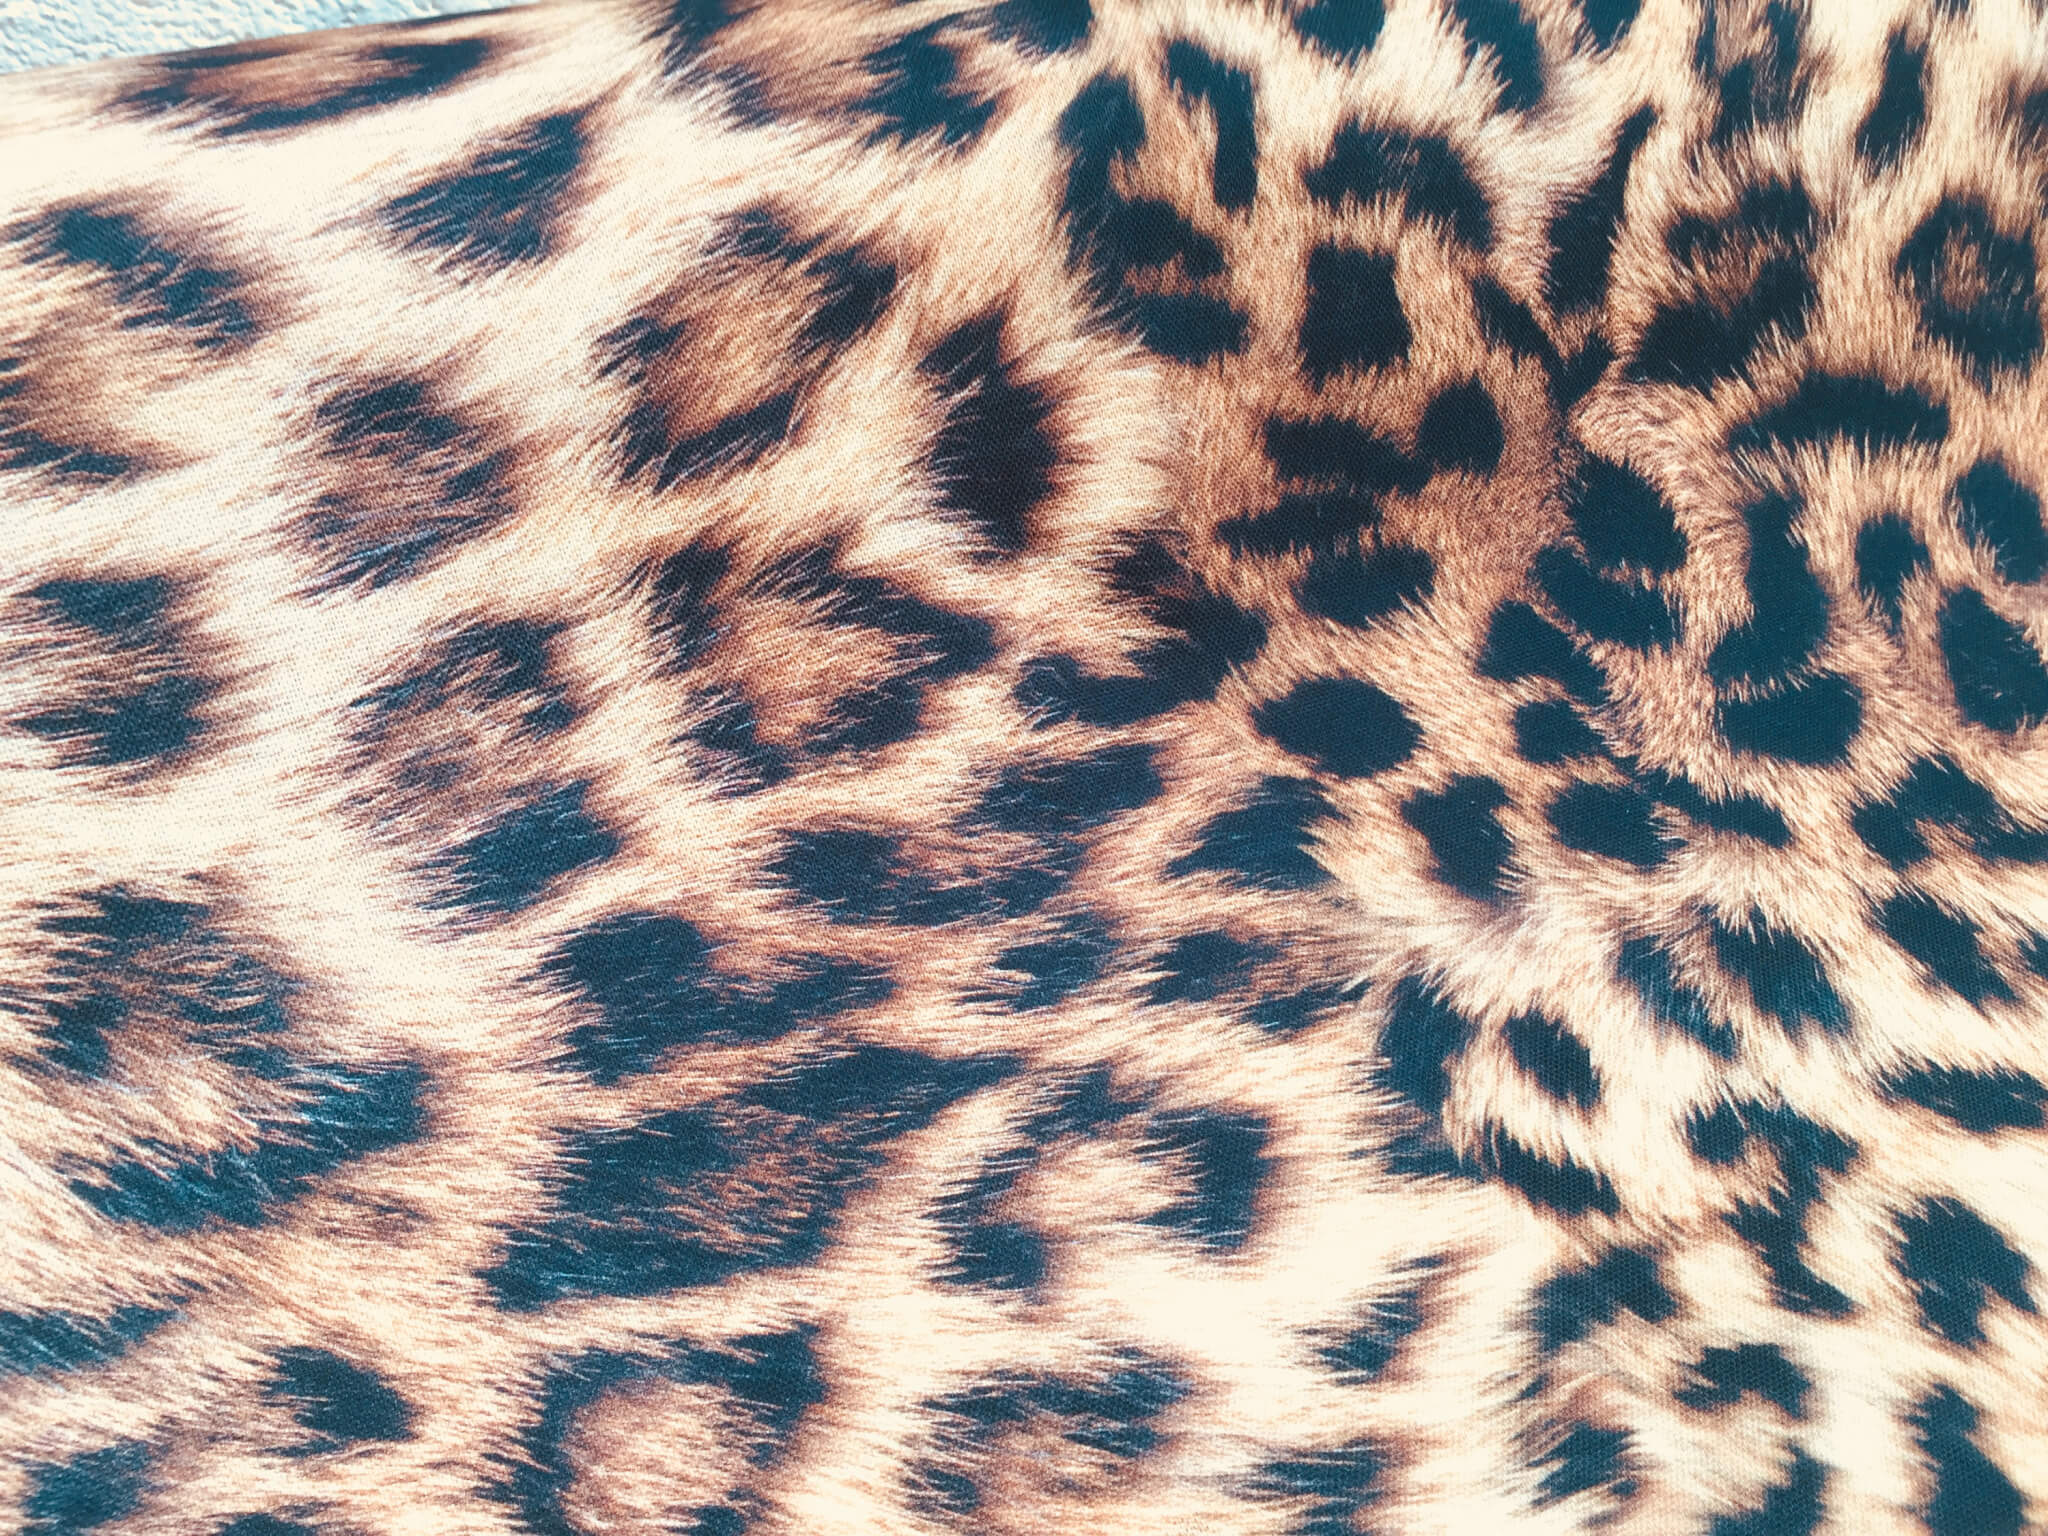 DIGI Leopard Fur Print Cotton Fabric for Curtains Upholstery